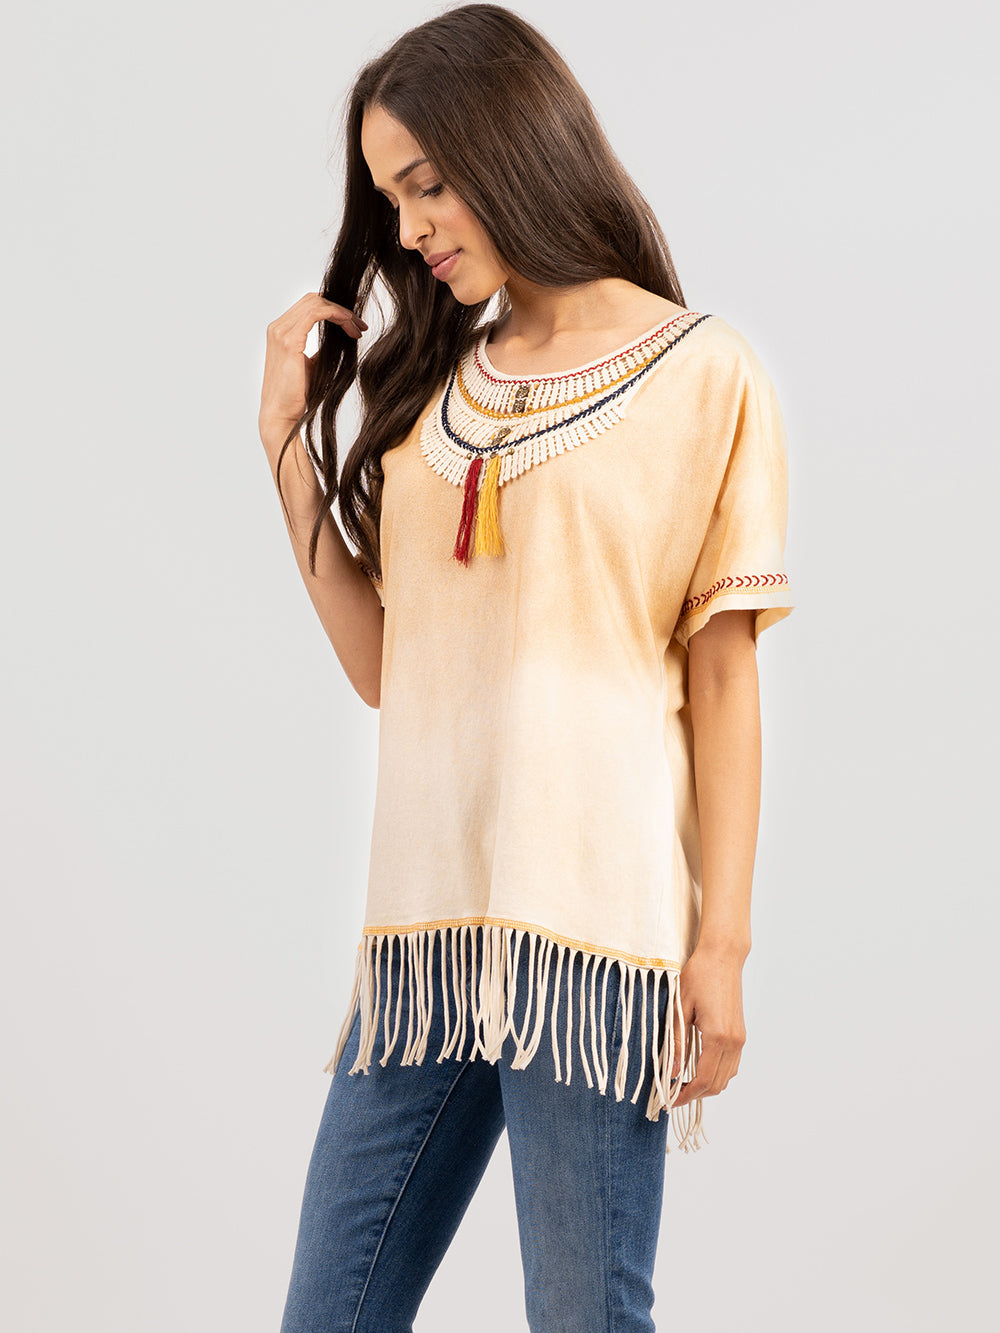 Delila Women’s Fringed Lace collar With Tassel Tee - Montana West World